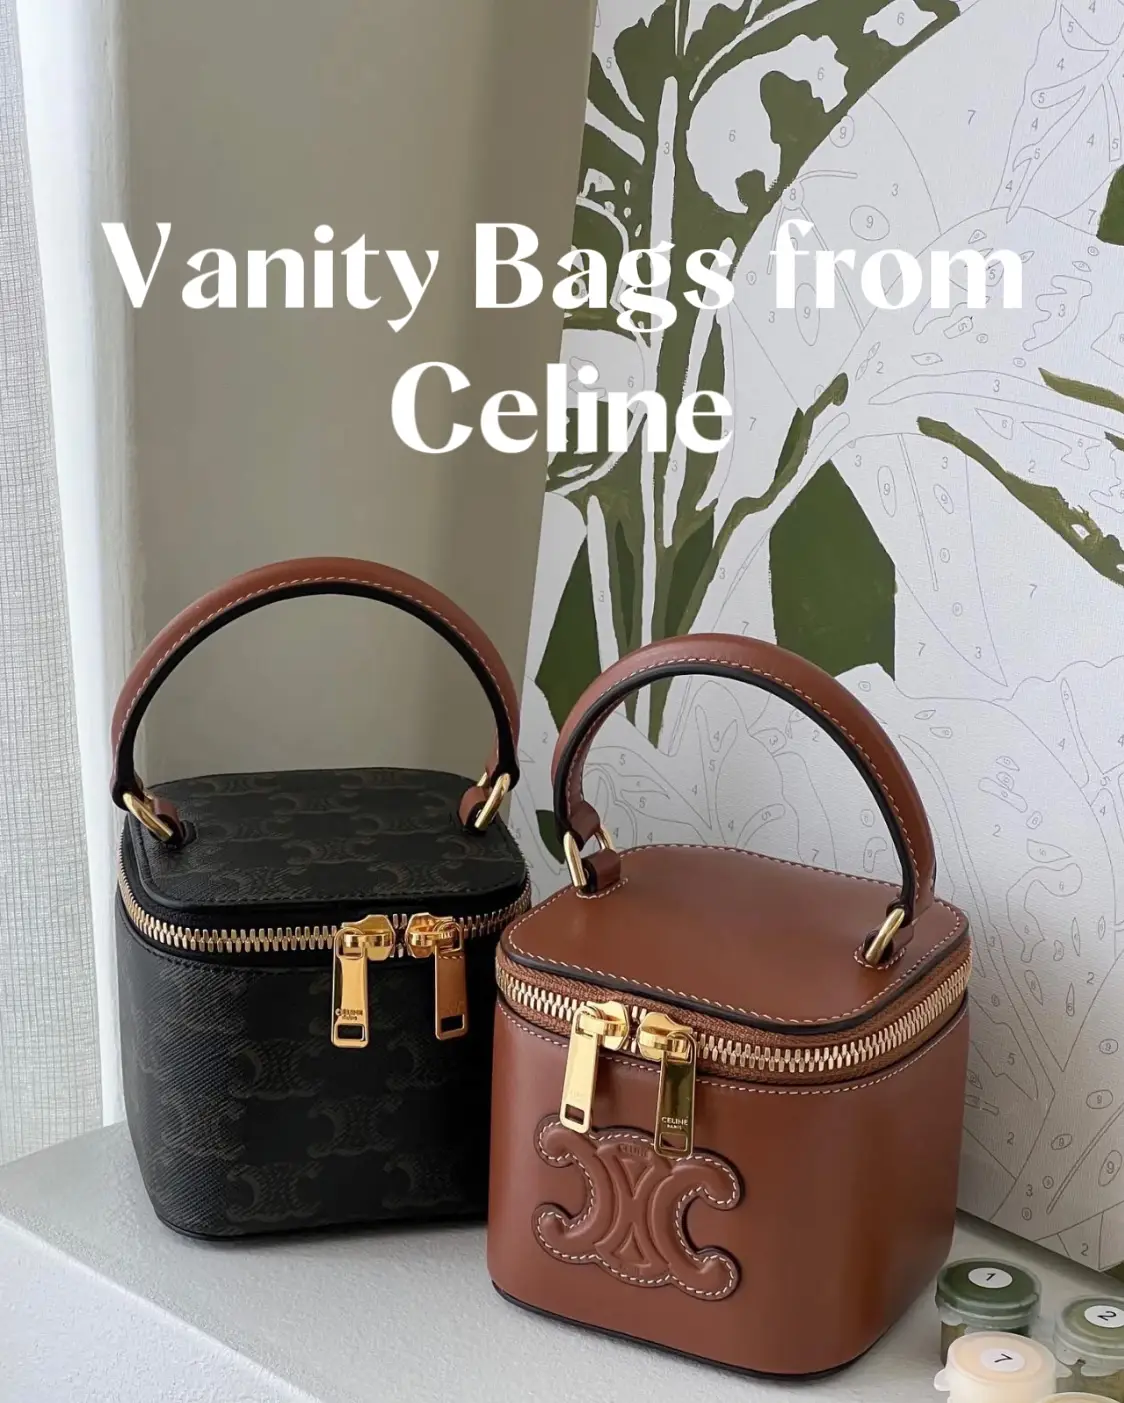 Celine - Mini Vanity Case in Triomphe Canvas and Calfskin Leather - Brown - for Women